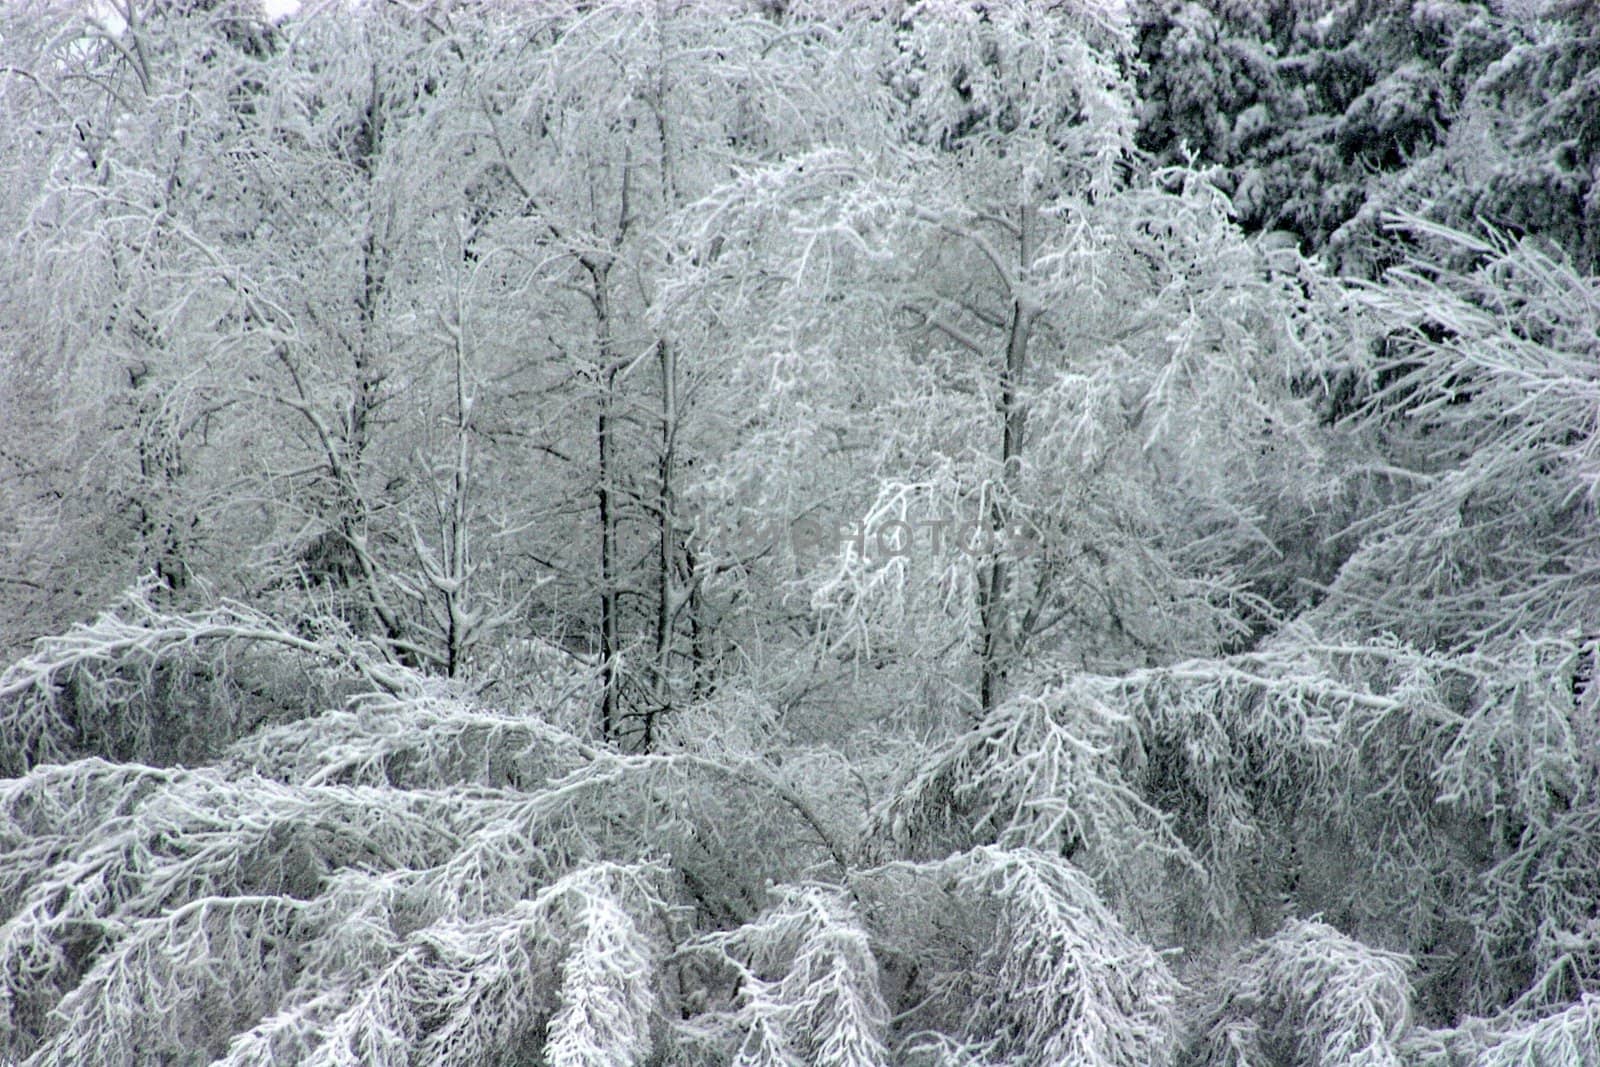 Bent trees after a heavy snow fall